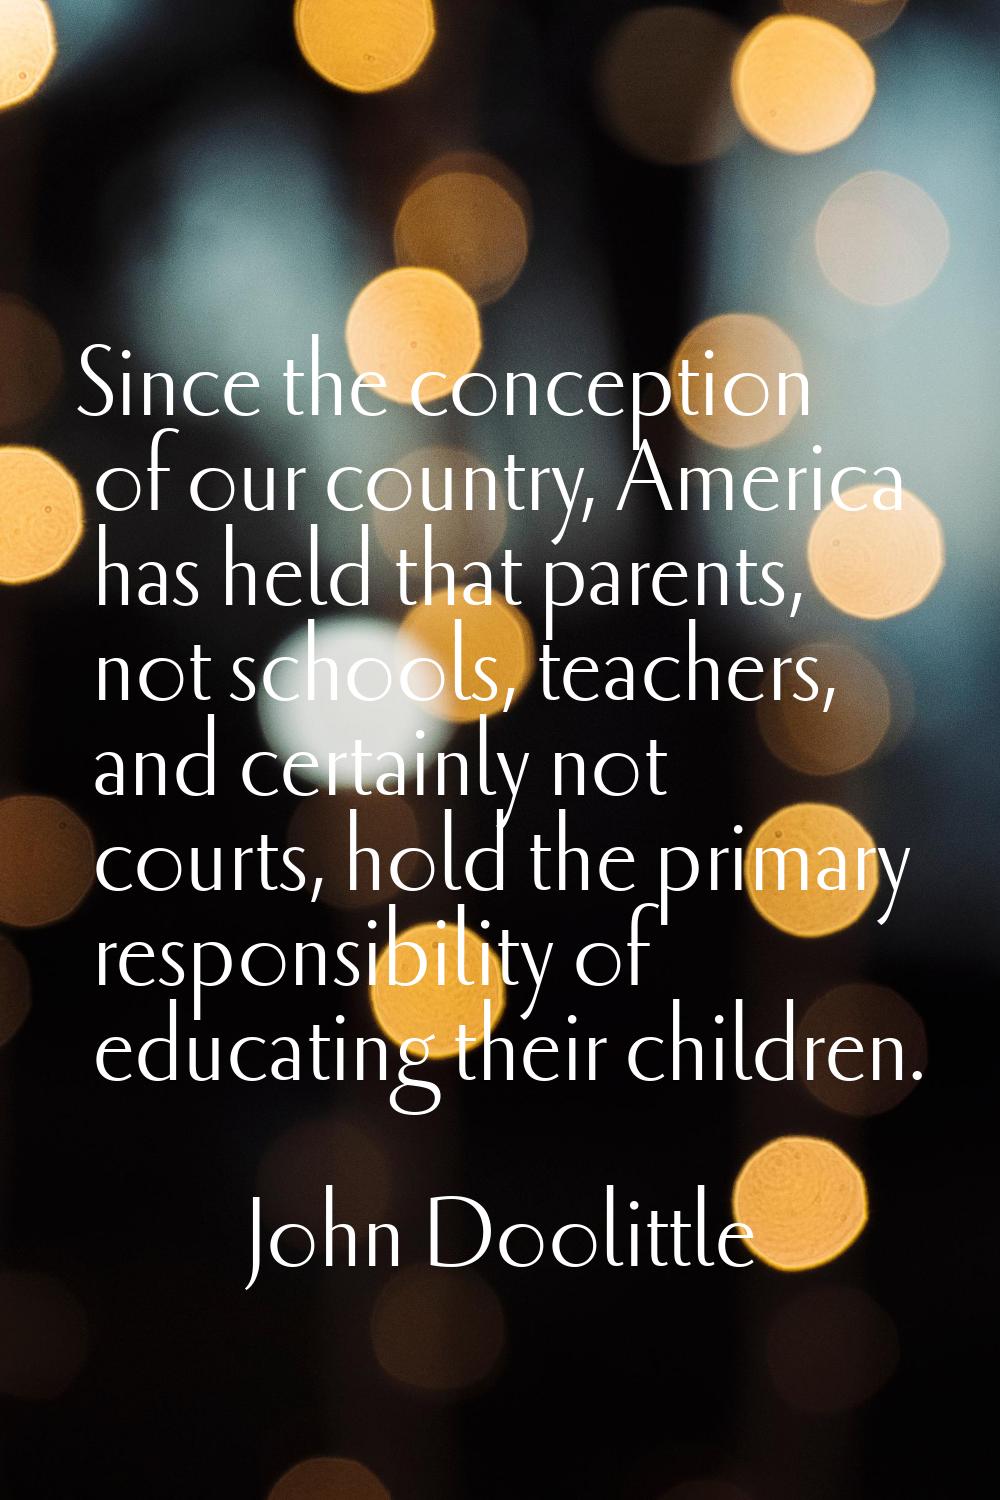 Since the conception of our country, America has held that parents, not schools, teachers, and cert